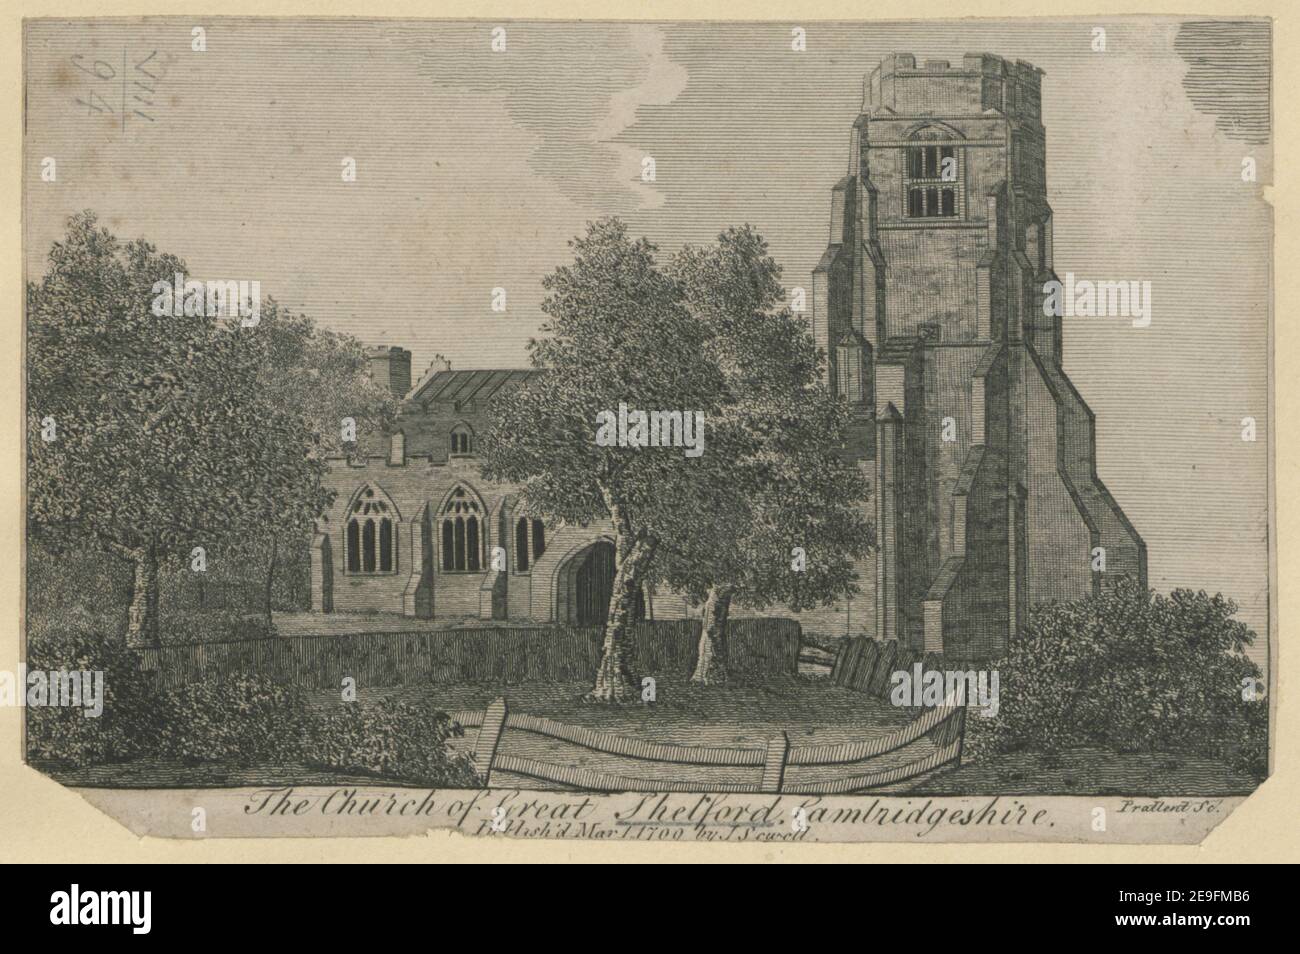 The Church of Great Shelford, Cambridgeshire.  Author  Prattent, Thomas 8.94. Place of publication: [London] Publisher: Publish'd Mar. 1. 1799 by J Sewell., Date of publication: [1799]  Item type: 1 print Medium: etching Dimensions: sheet 11.5 x 16.5 cm [trimmed within platemark]  Former owner: George III, King of Great Britain, 1738-1820 Stock Photo